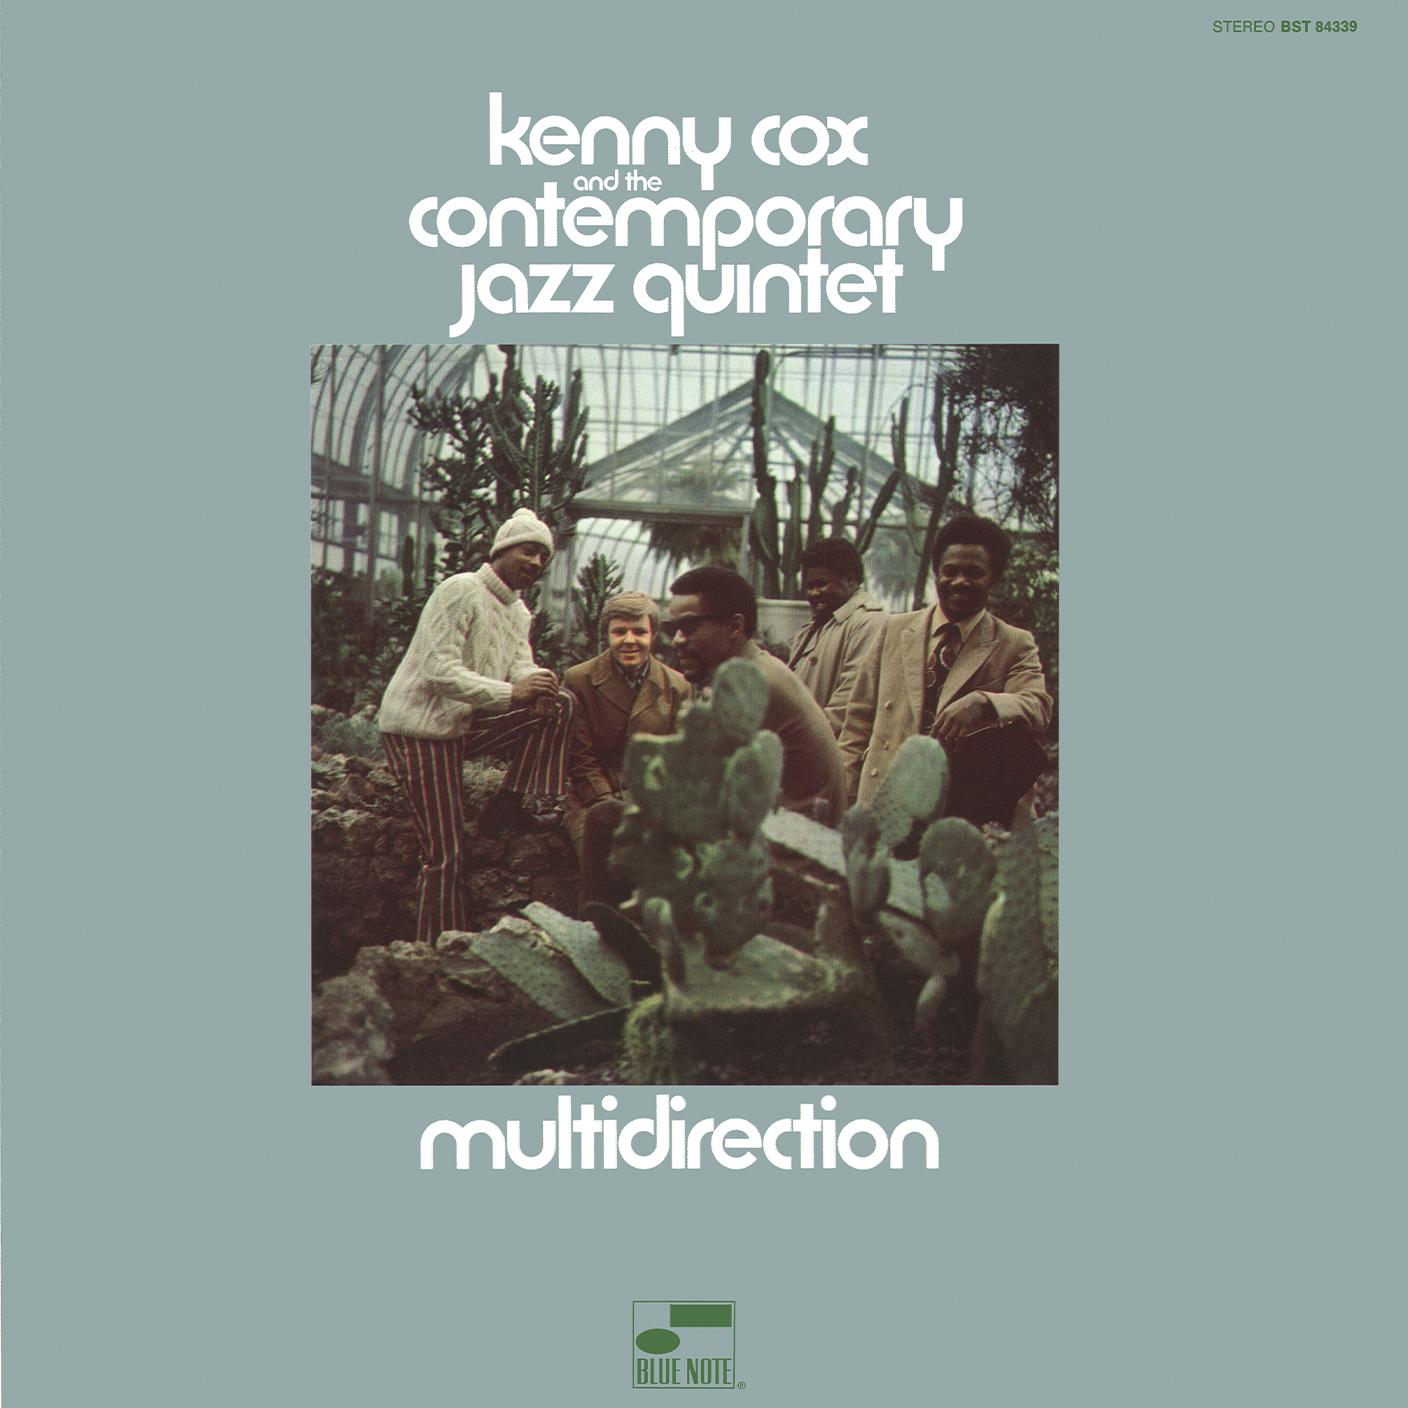 Kenny Cox and the Contemporary Jazz Quintet